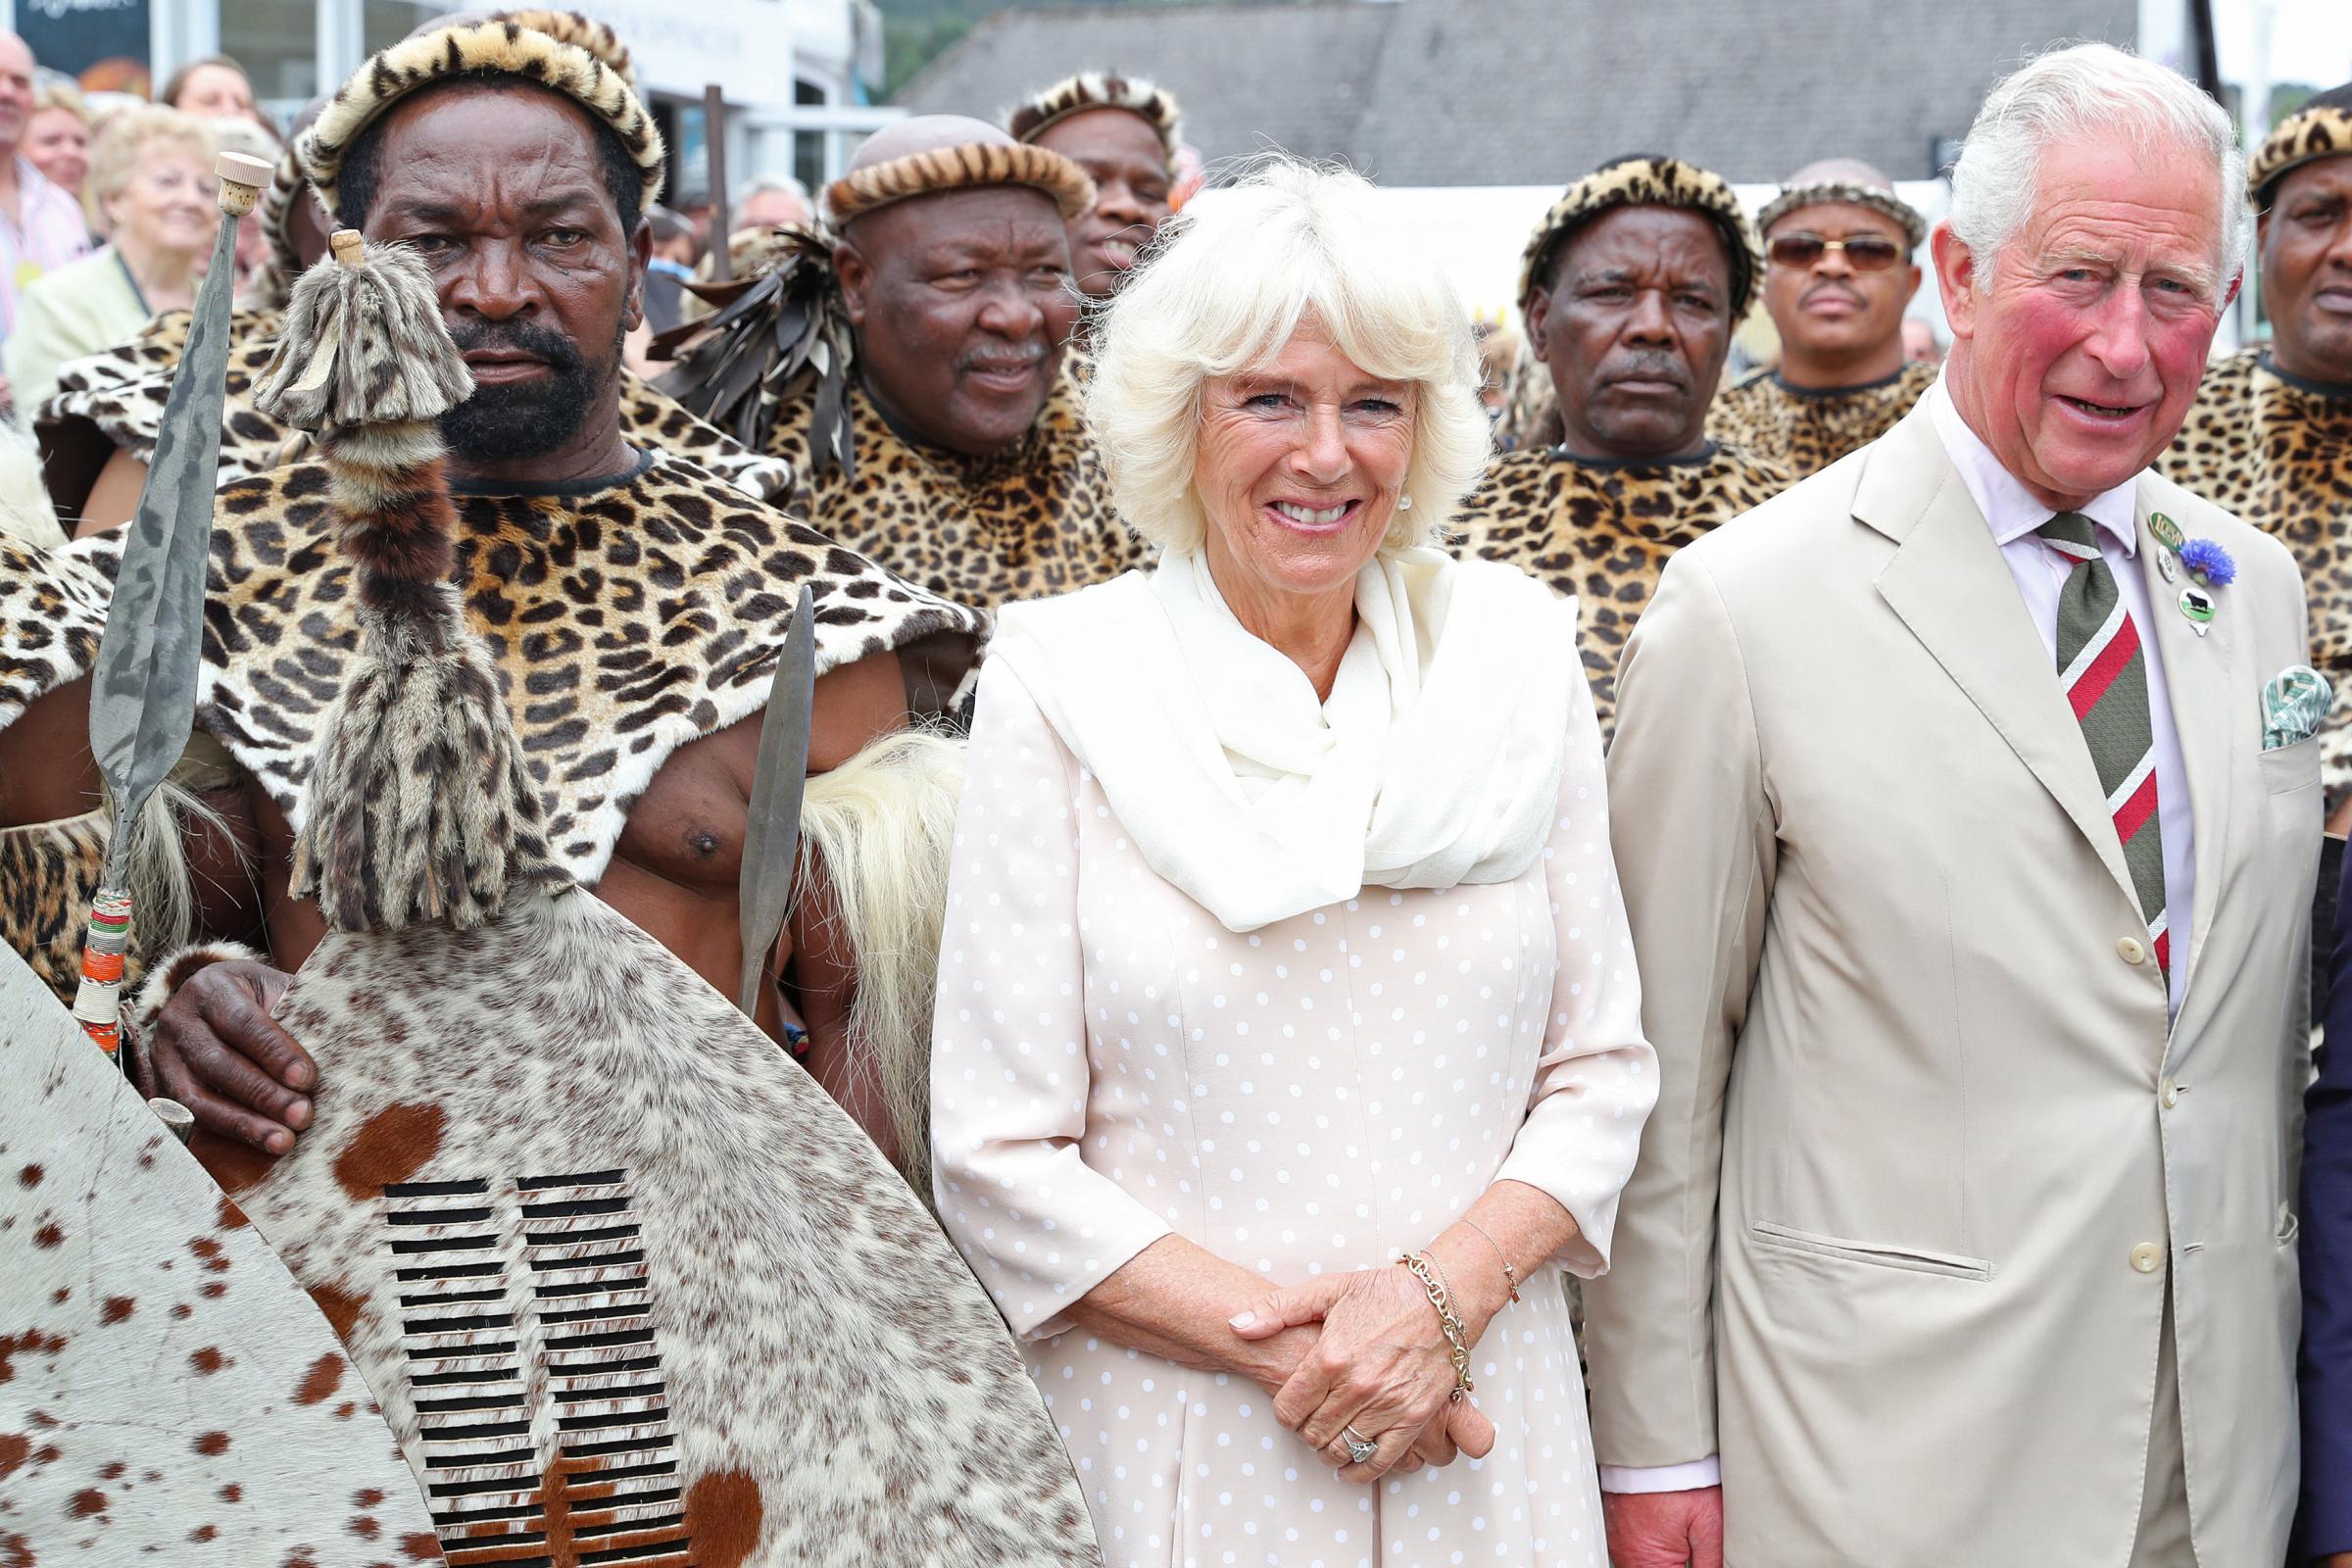 The Prince of Wales and Duchess of Cornwall meet members of the Zulu impi regiment during the 100th Royal Welsh Show at the Royal Welsh Showground, Llanelwedd, Builth Wells. PRESS ASSOCIATION Photo. Picture date: Monday July 22, 2019. See PA story ROY